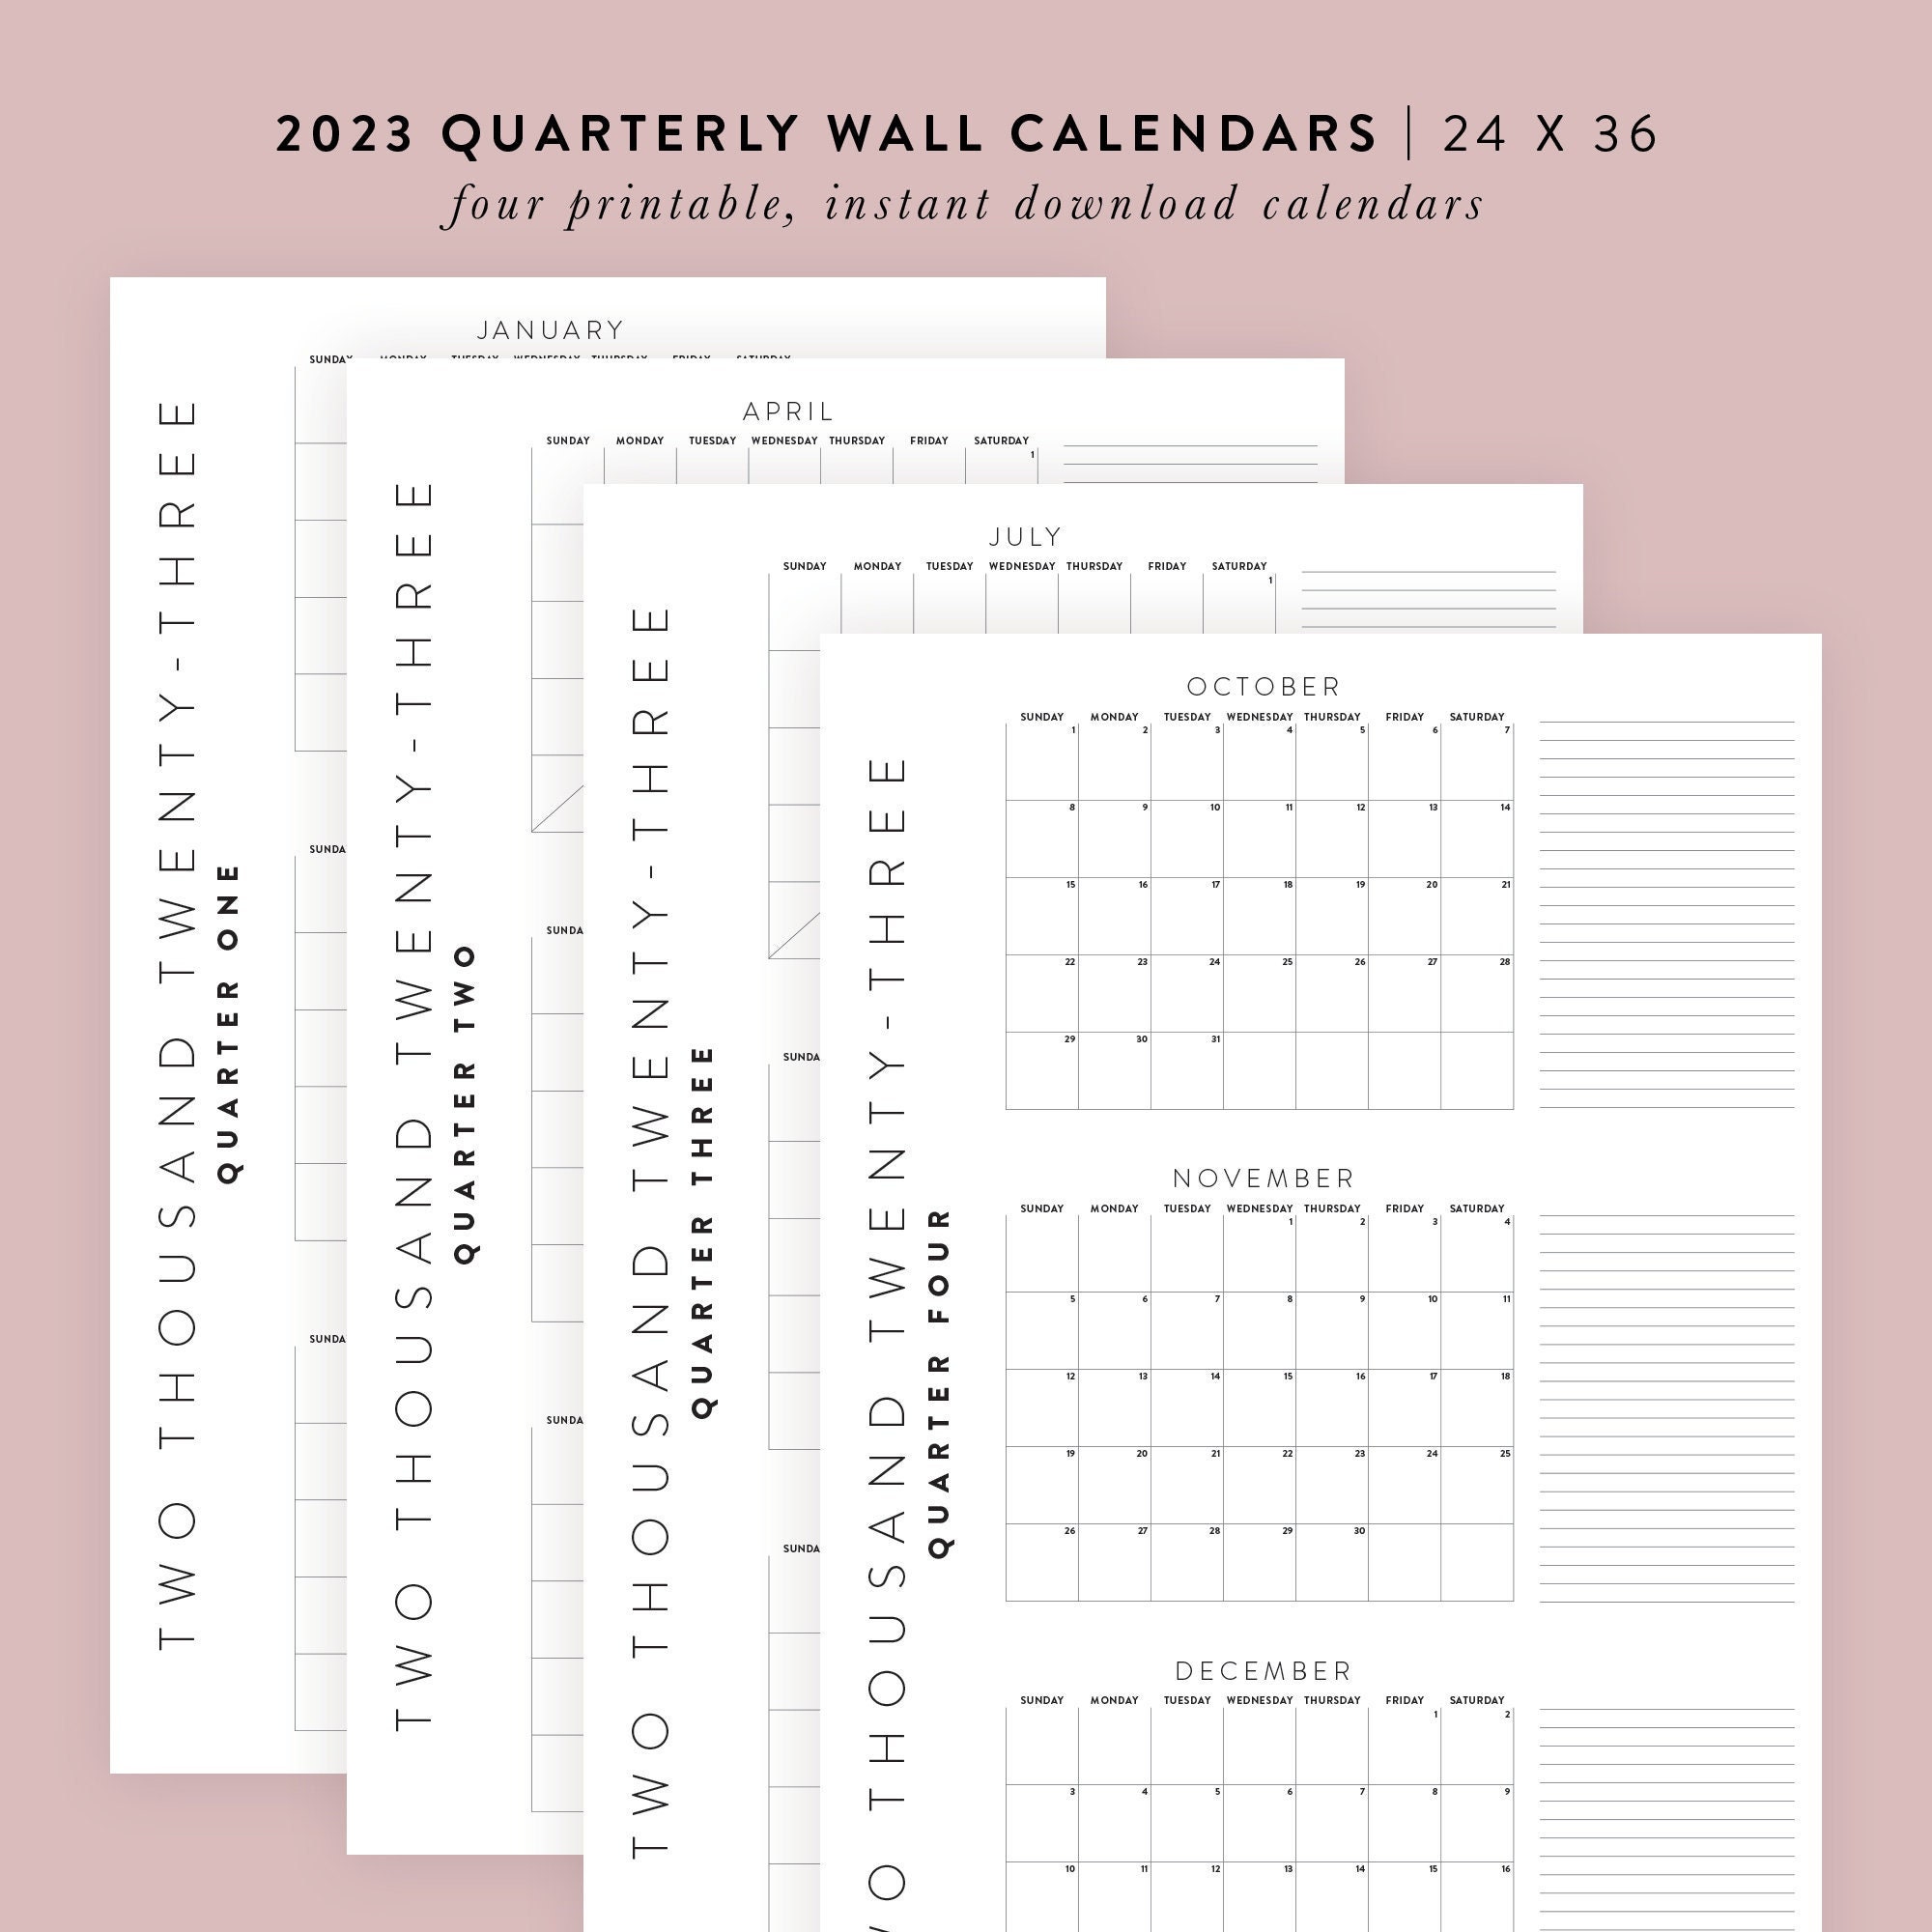 Aesthetic anime calendar 2023 year at a glance  Poster for Sale by  RecStore